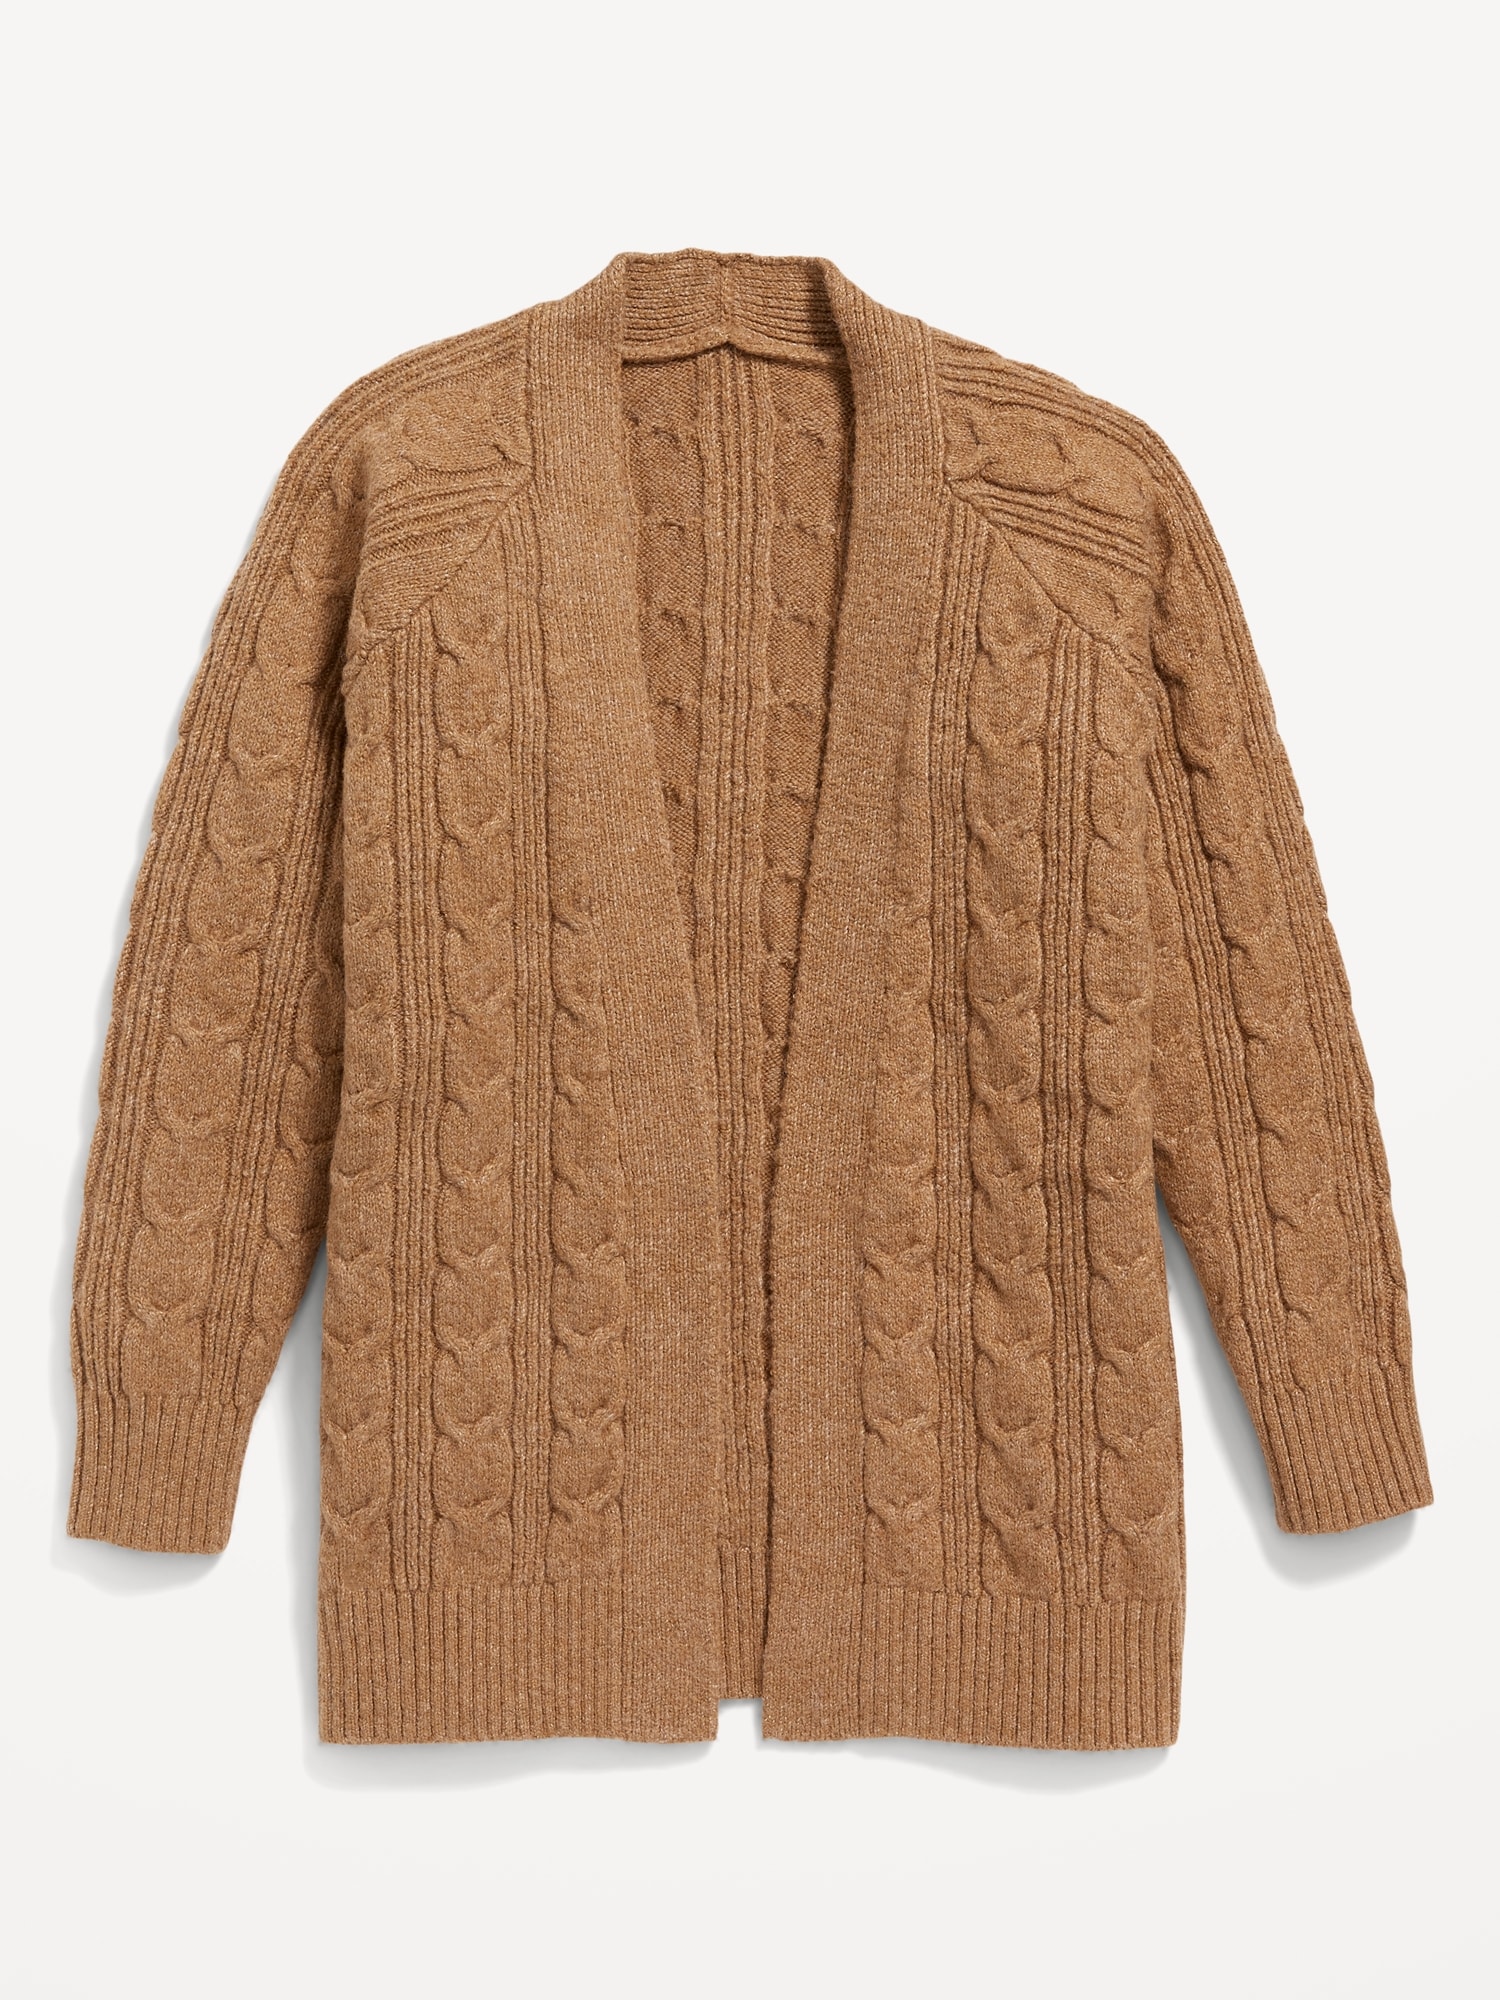 Cozy-Knit Open-Front Cardigan Sweater for Women